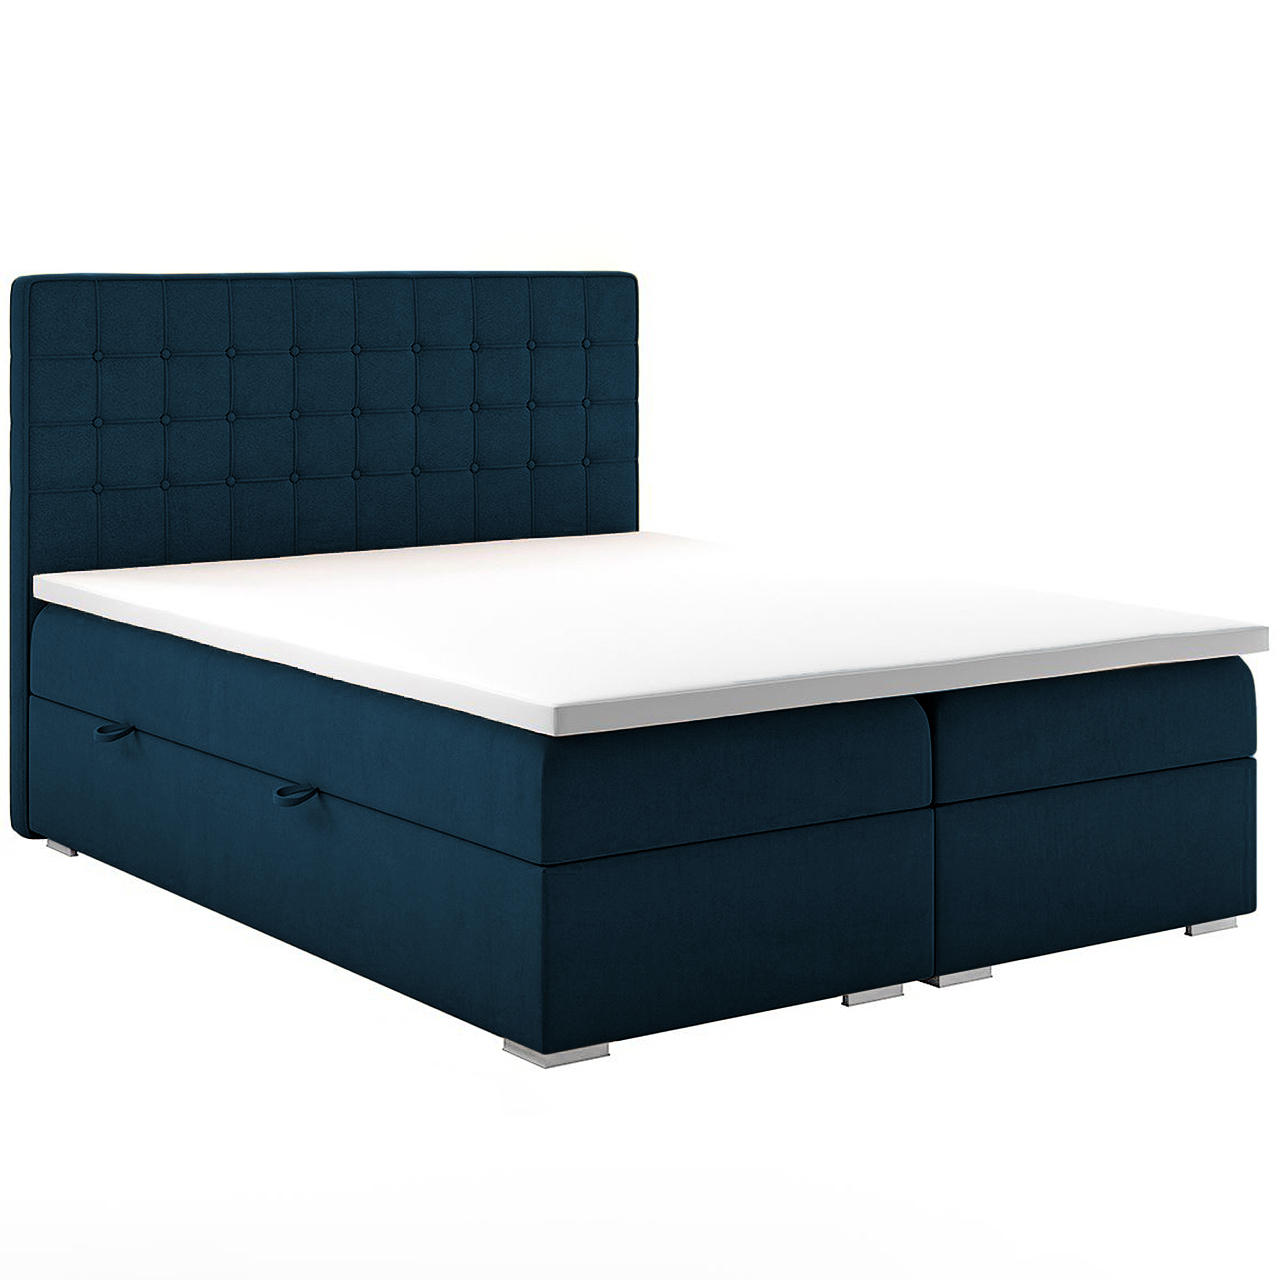 Upholstered bed CARLOS 120x200 monolith 76